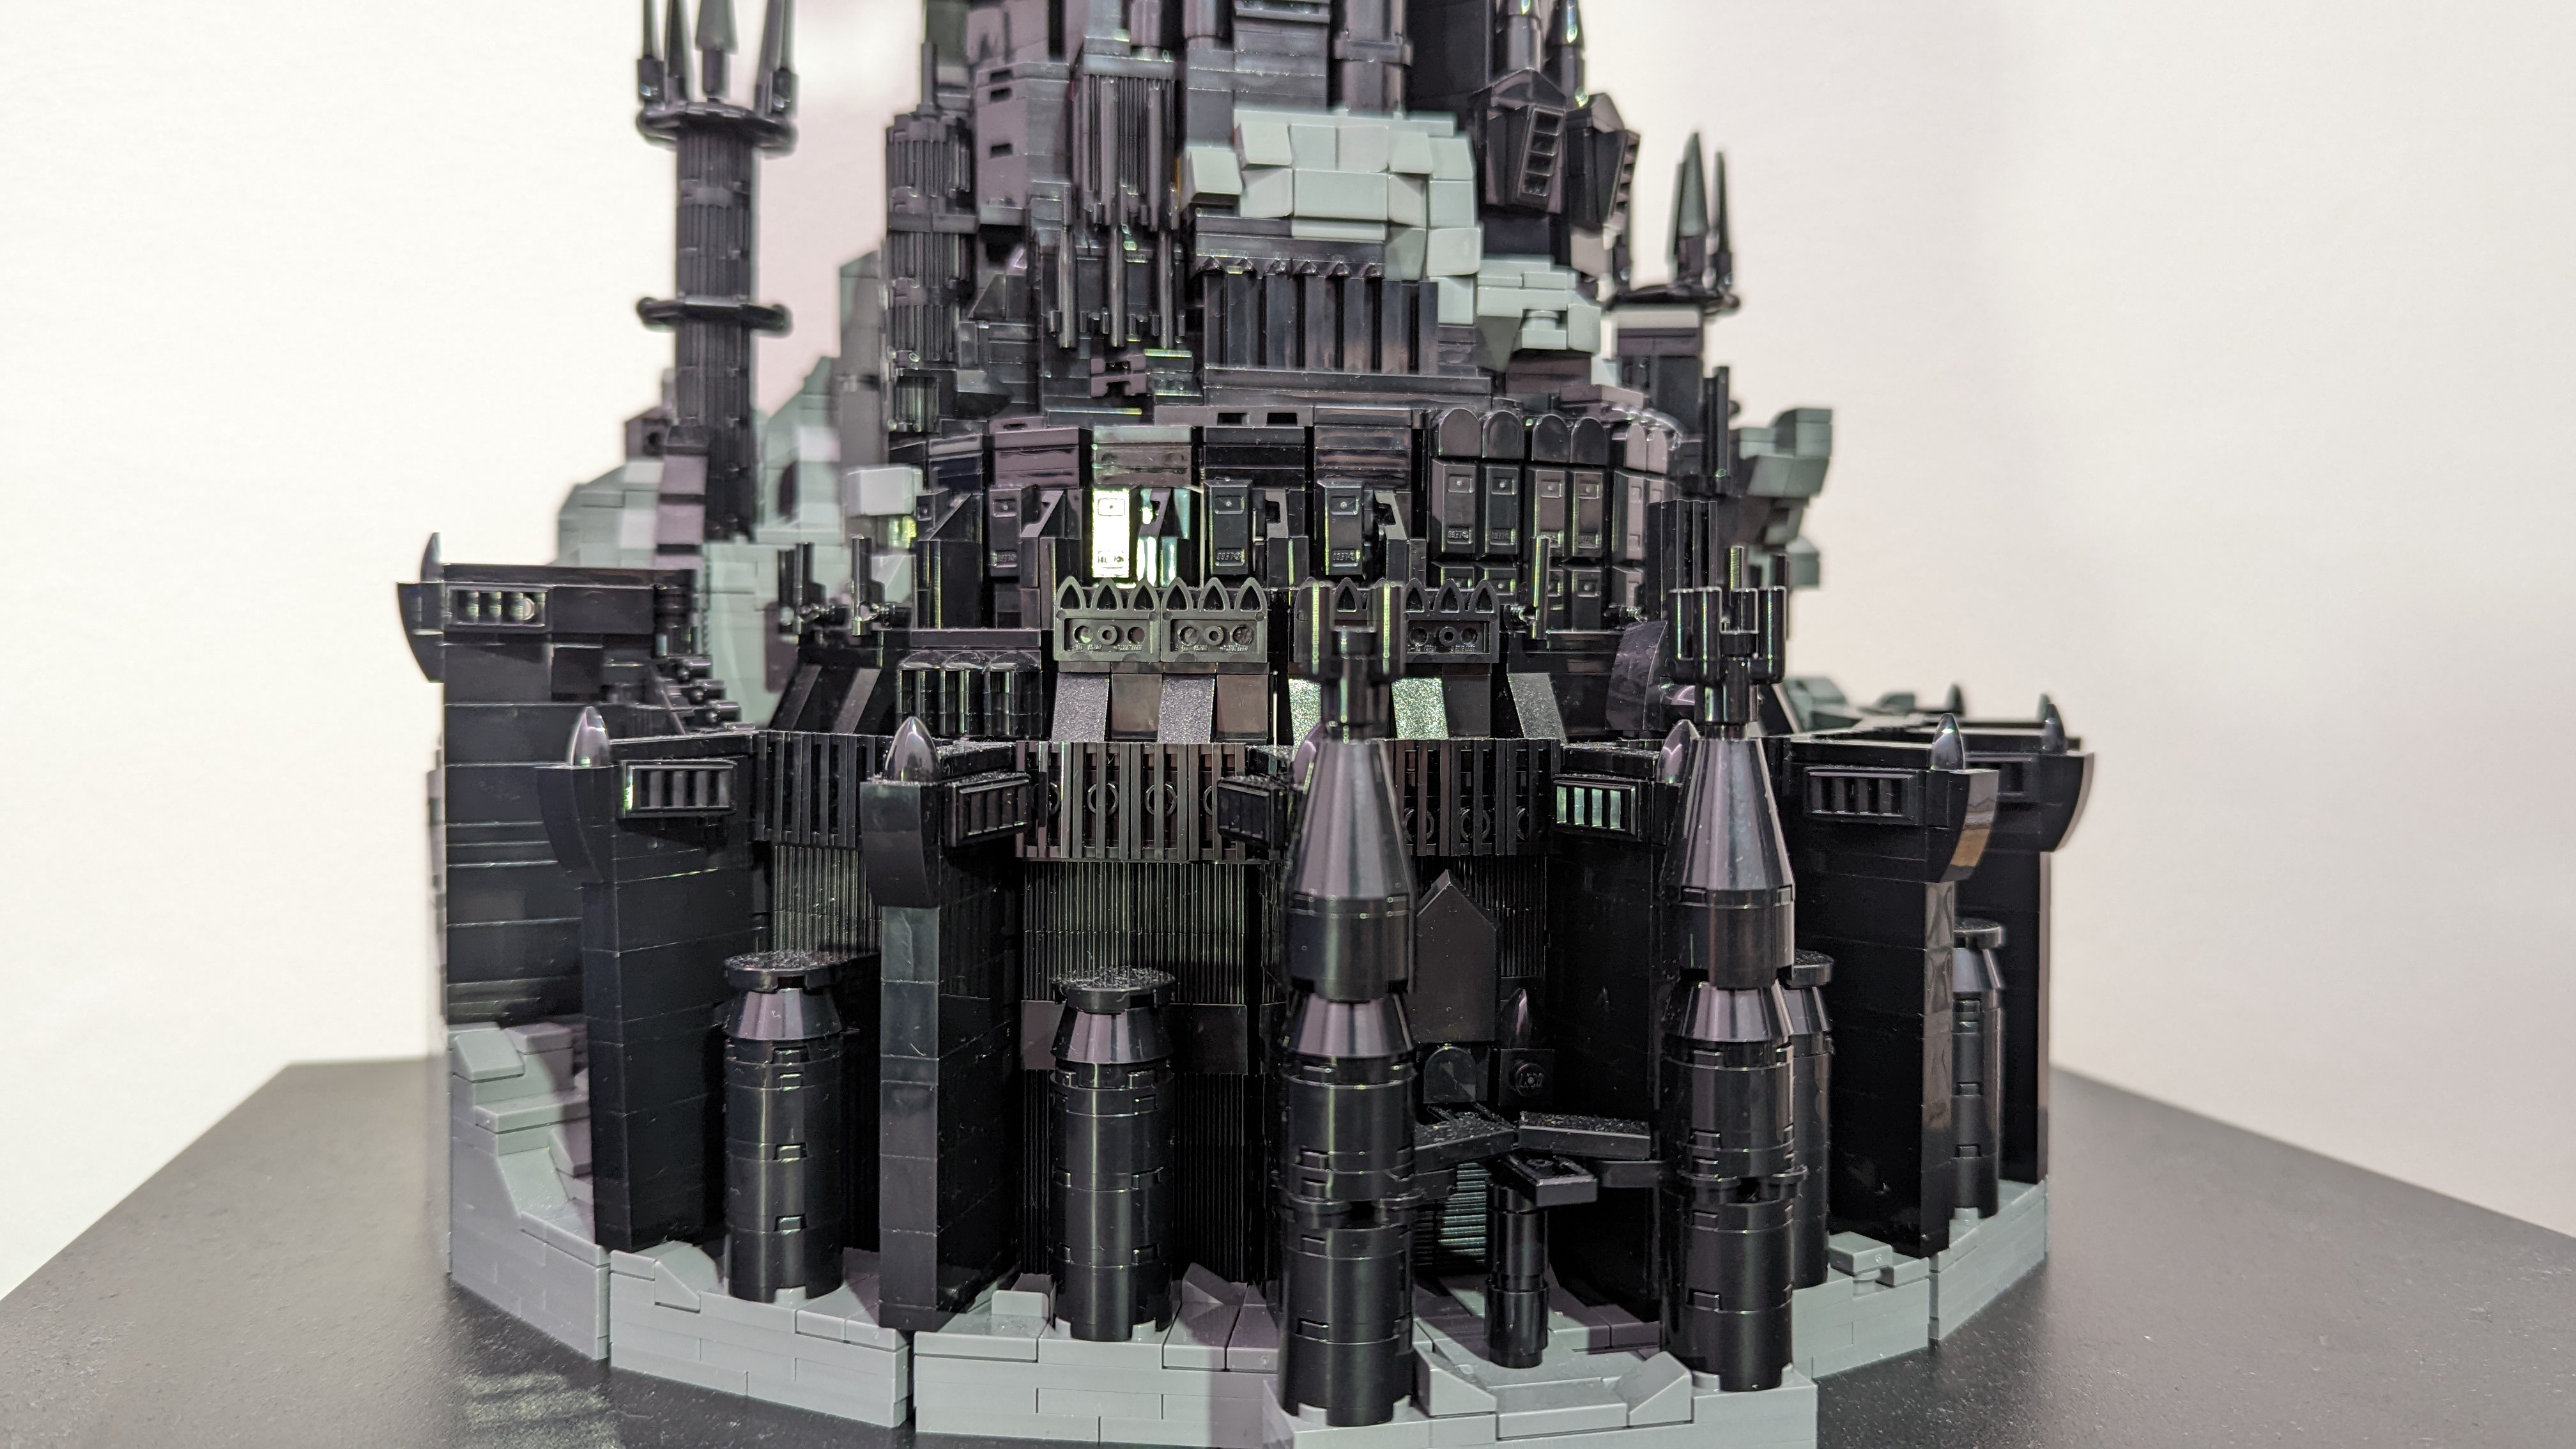 Movie MOC-126262 The Lord of the Rings Barad-dûr Dark Tower MOCBRICKLAND